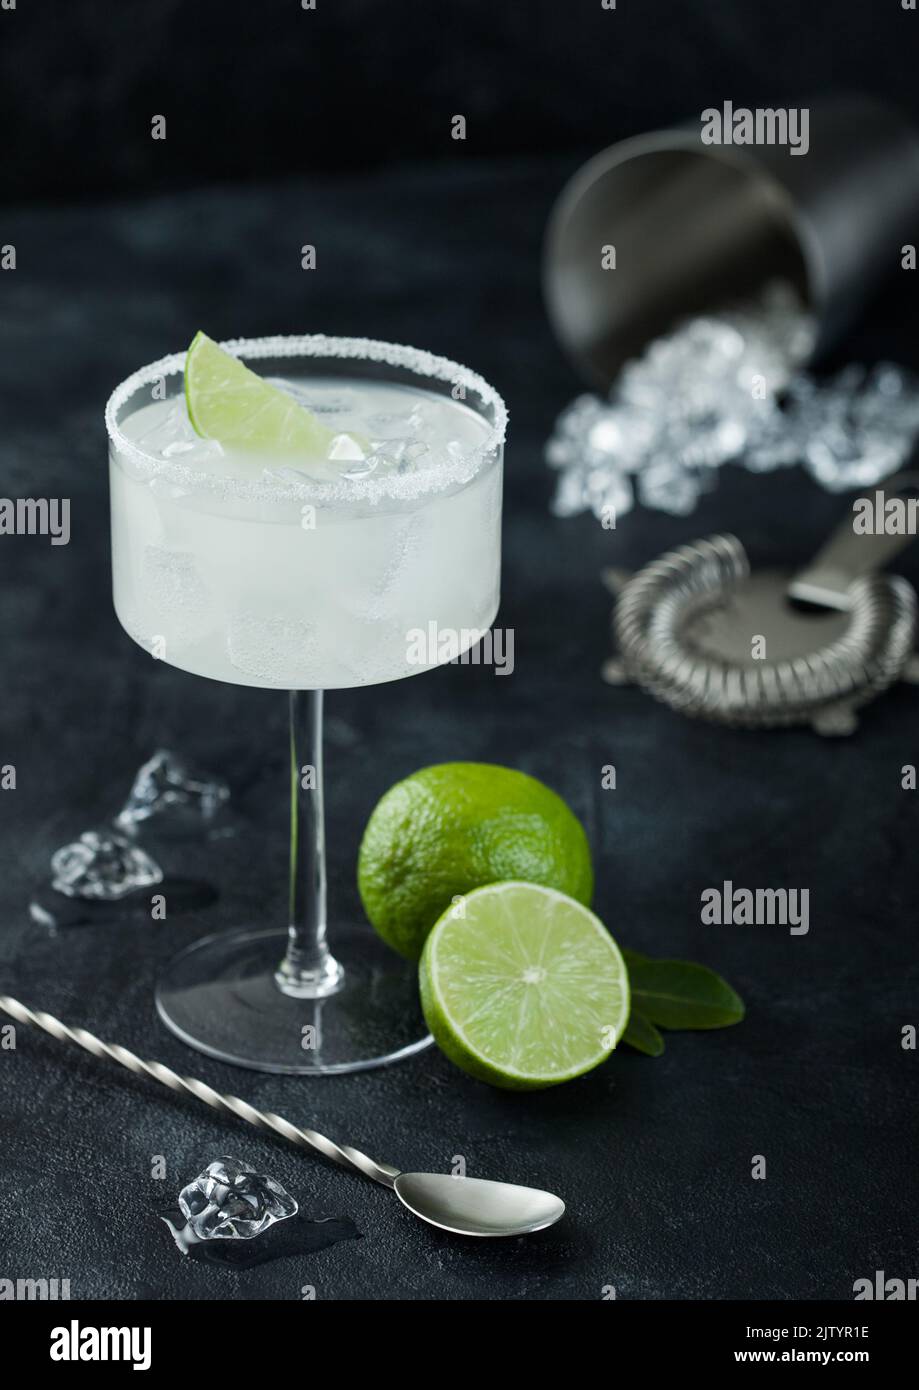 Luxury glass of Margarita cocktail with fresh limes and bar spoon with ice cubes in shaker on black table background. Stock Photo